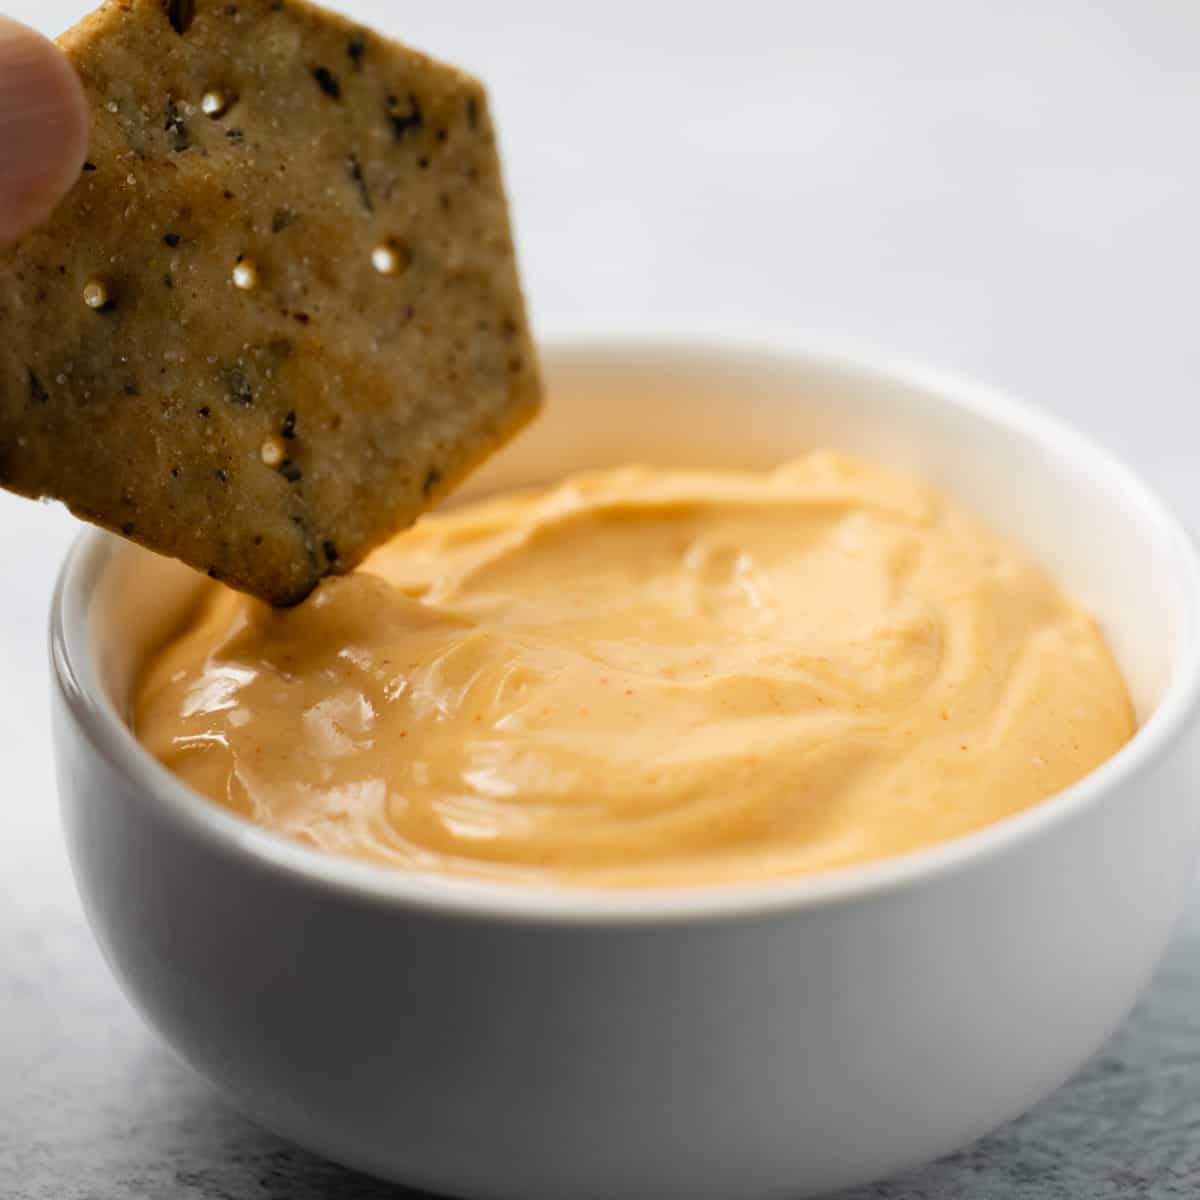 Flourless cheese sauce in a white bowl with a cracker dipping in.